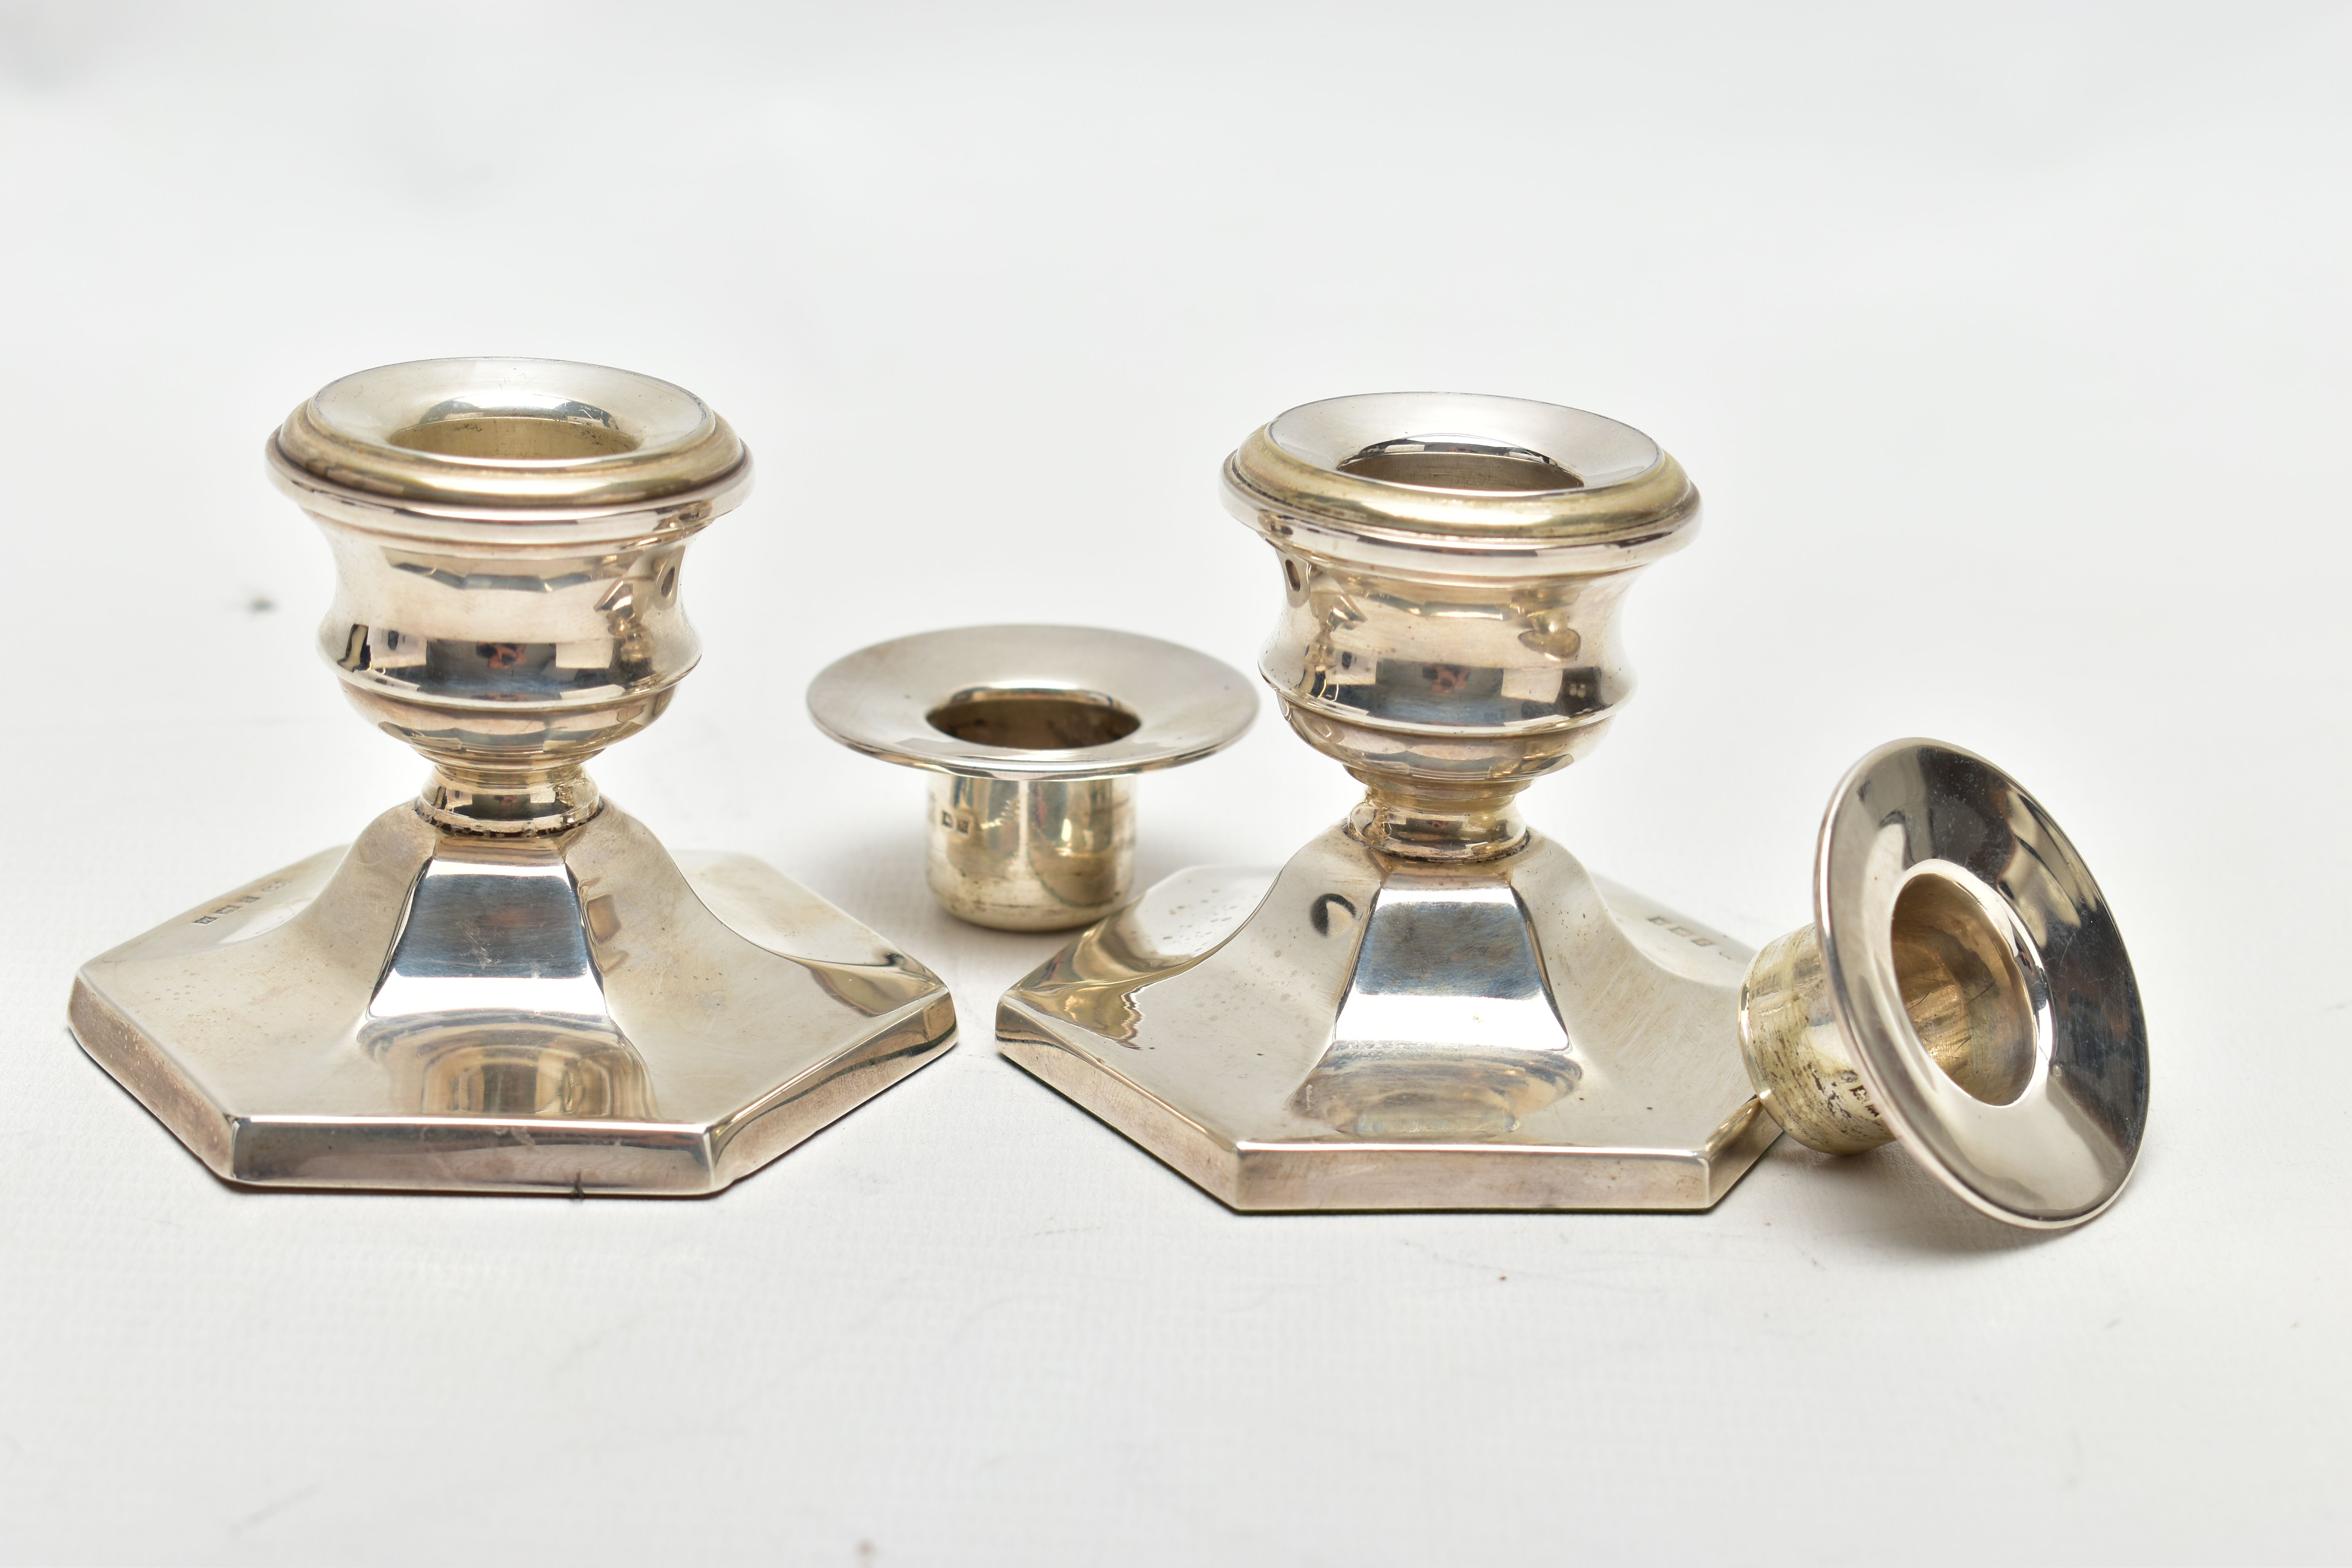 A PAIR OF SILVER CANDLE STICKS, two dwarf candle sticks, hexagonal weighted bases, approximate - Image 2 of 4